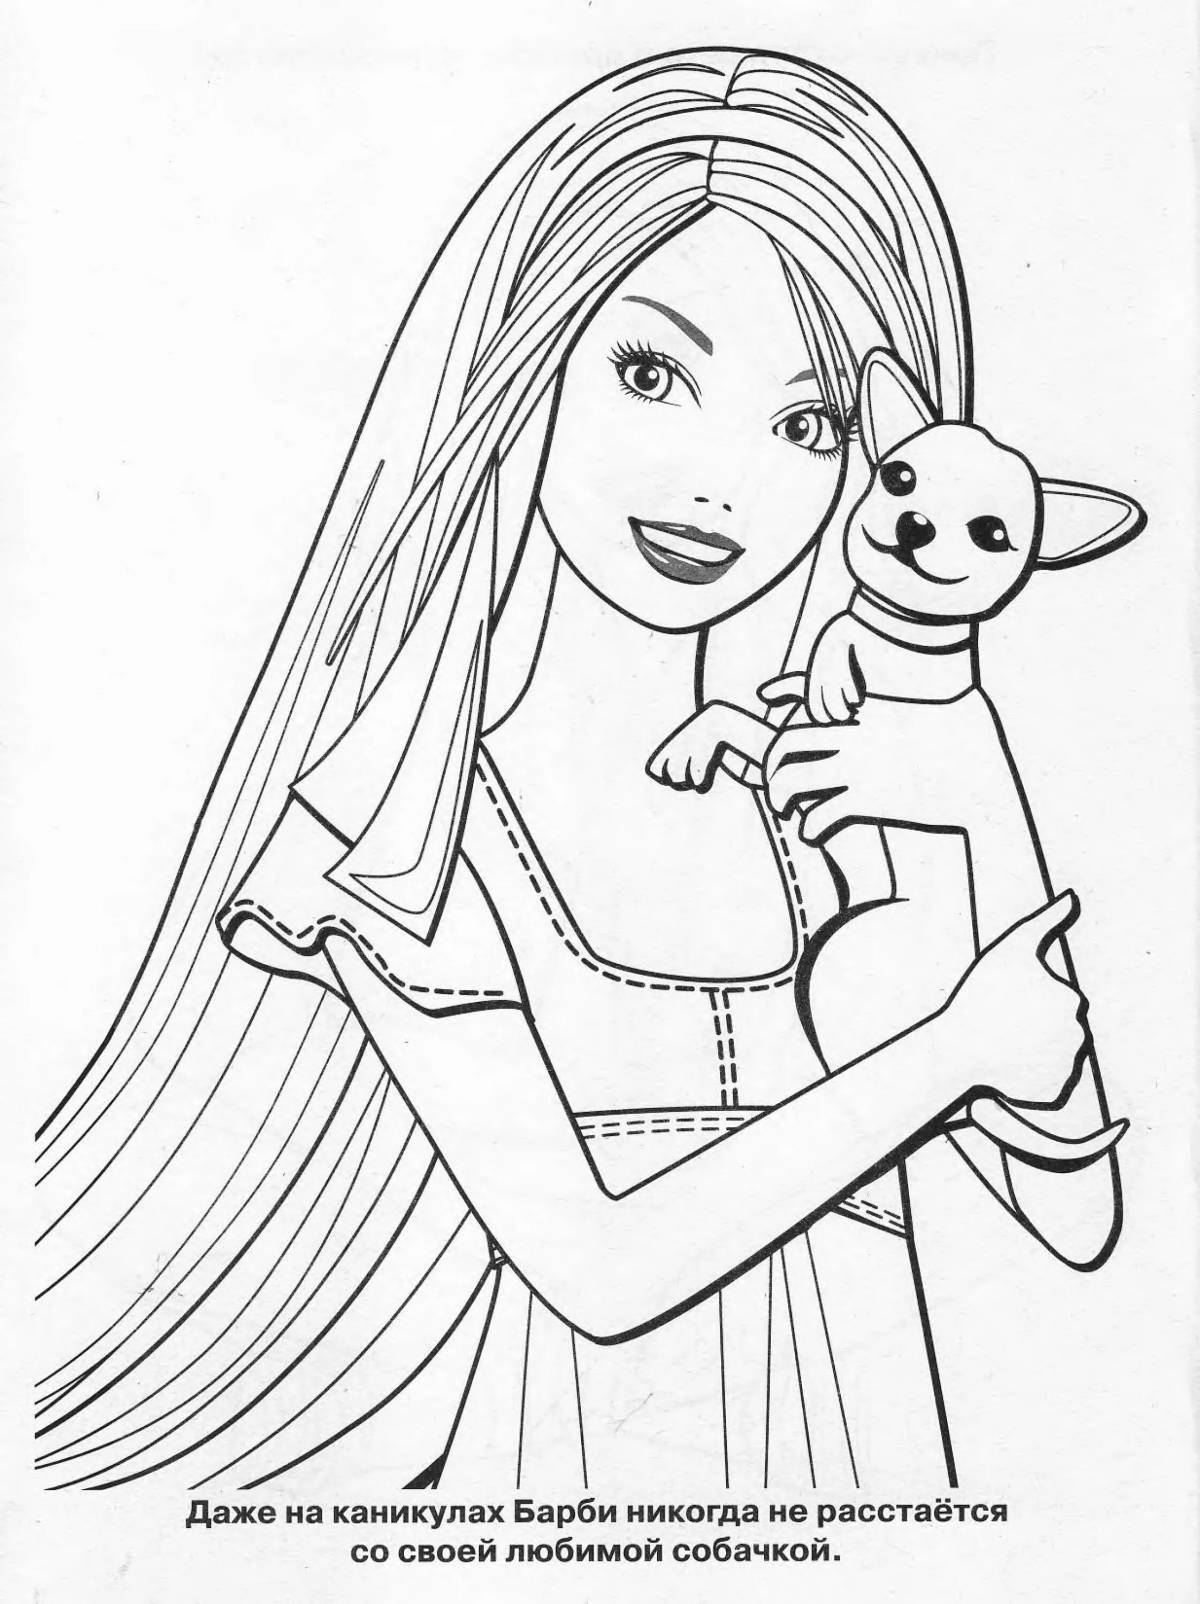 Delightful coloring of barbie with a dog